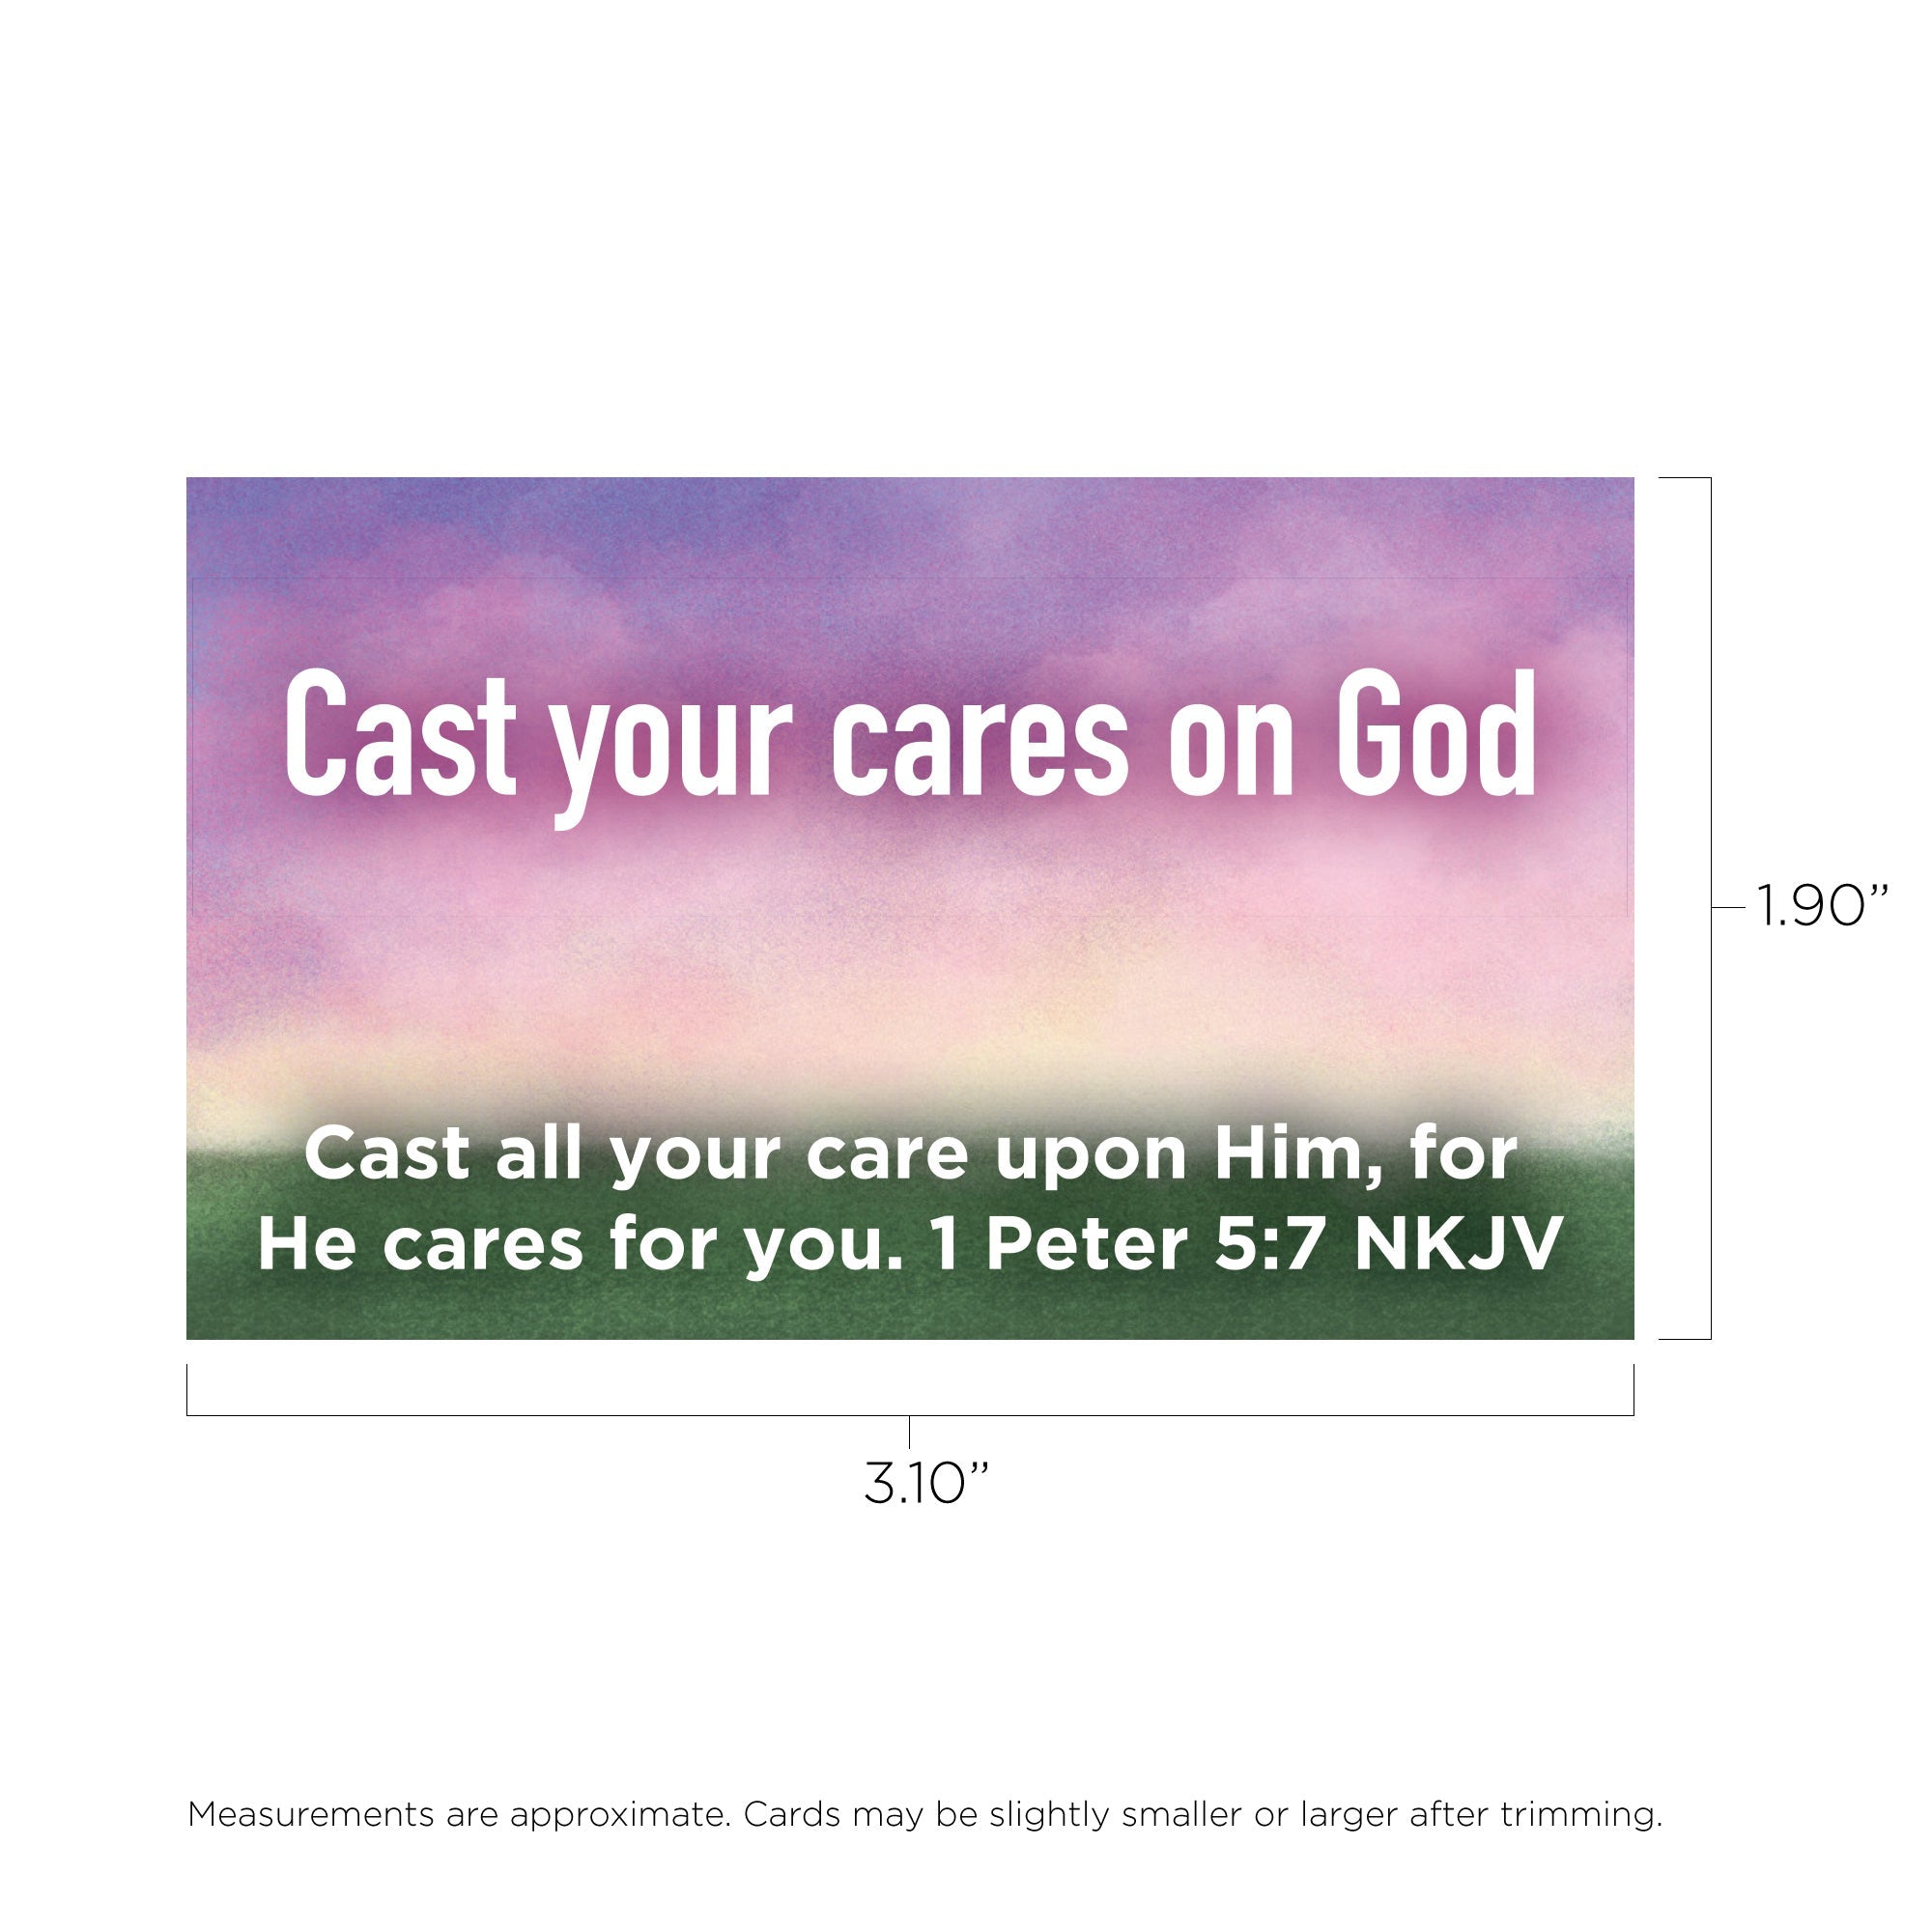 Children and Youth, Pass Along Scripture Cards, Cast Your Cares on God, 1 Peter 5:7, Pack of 25